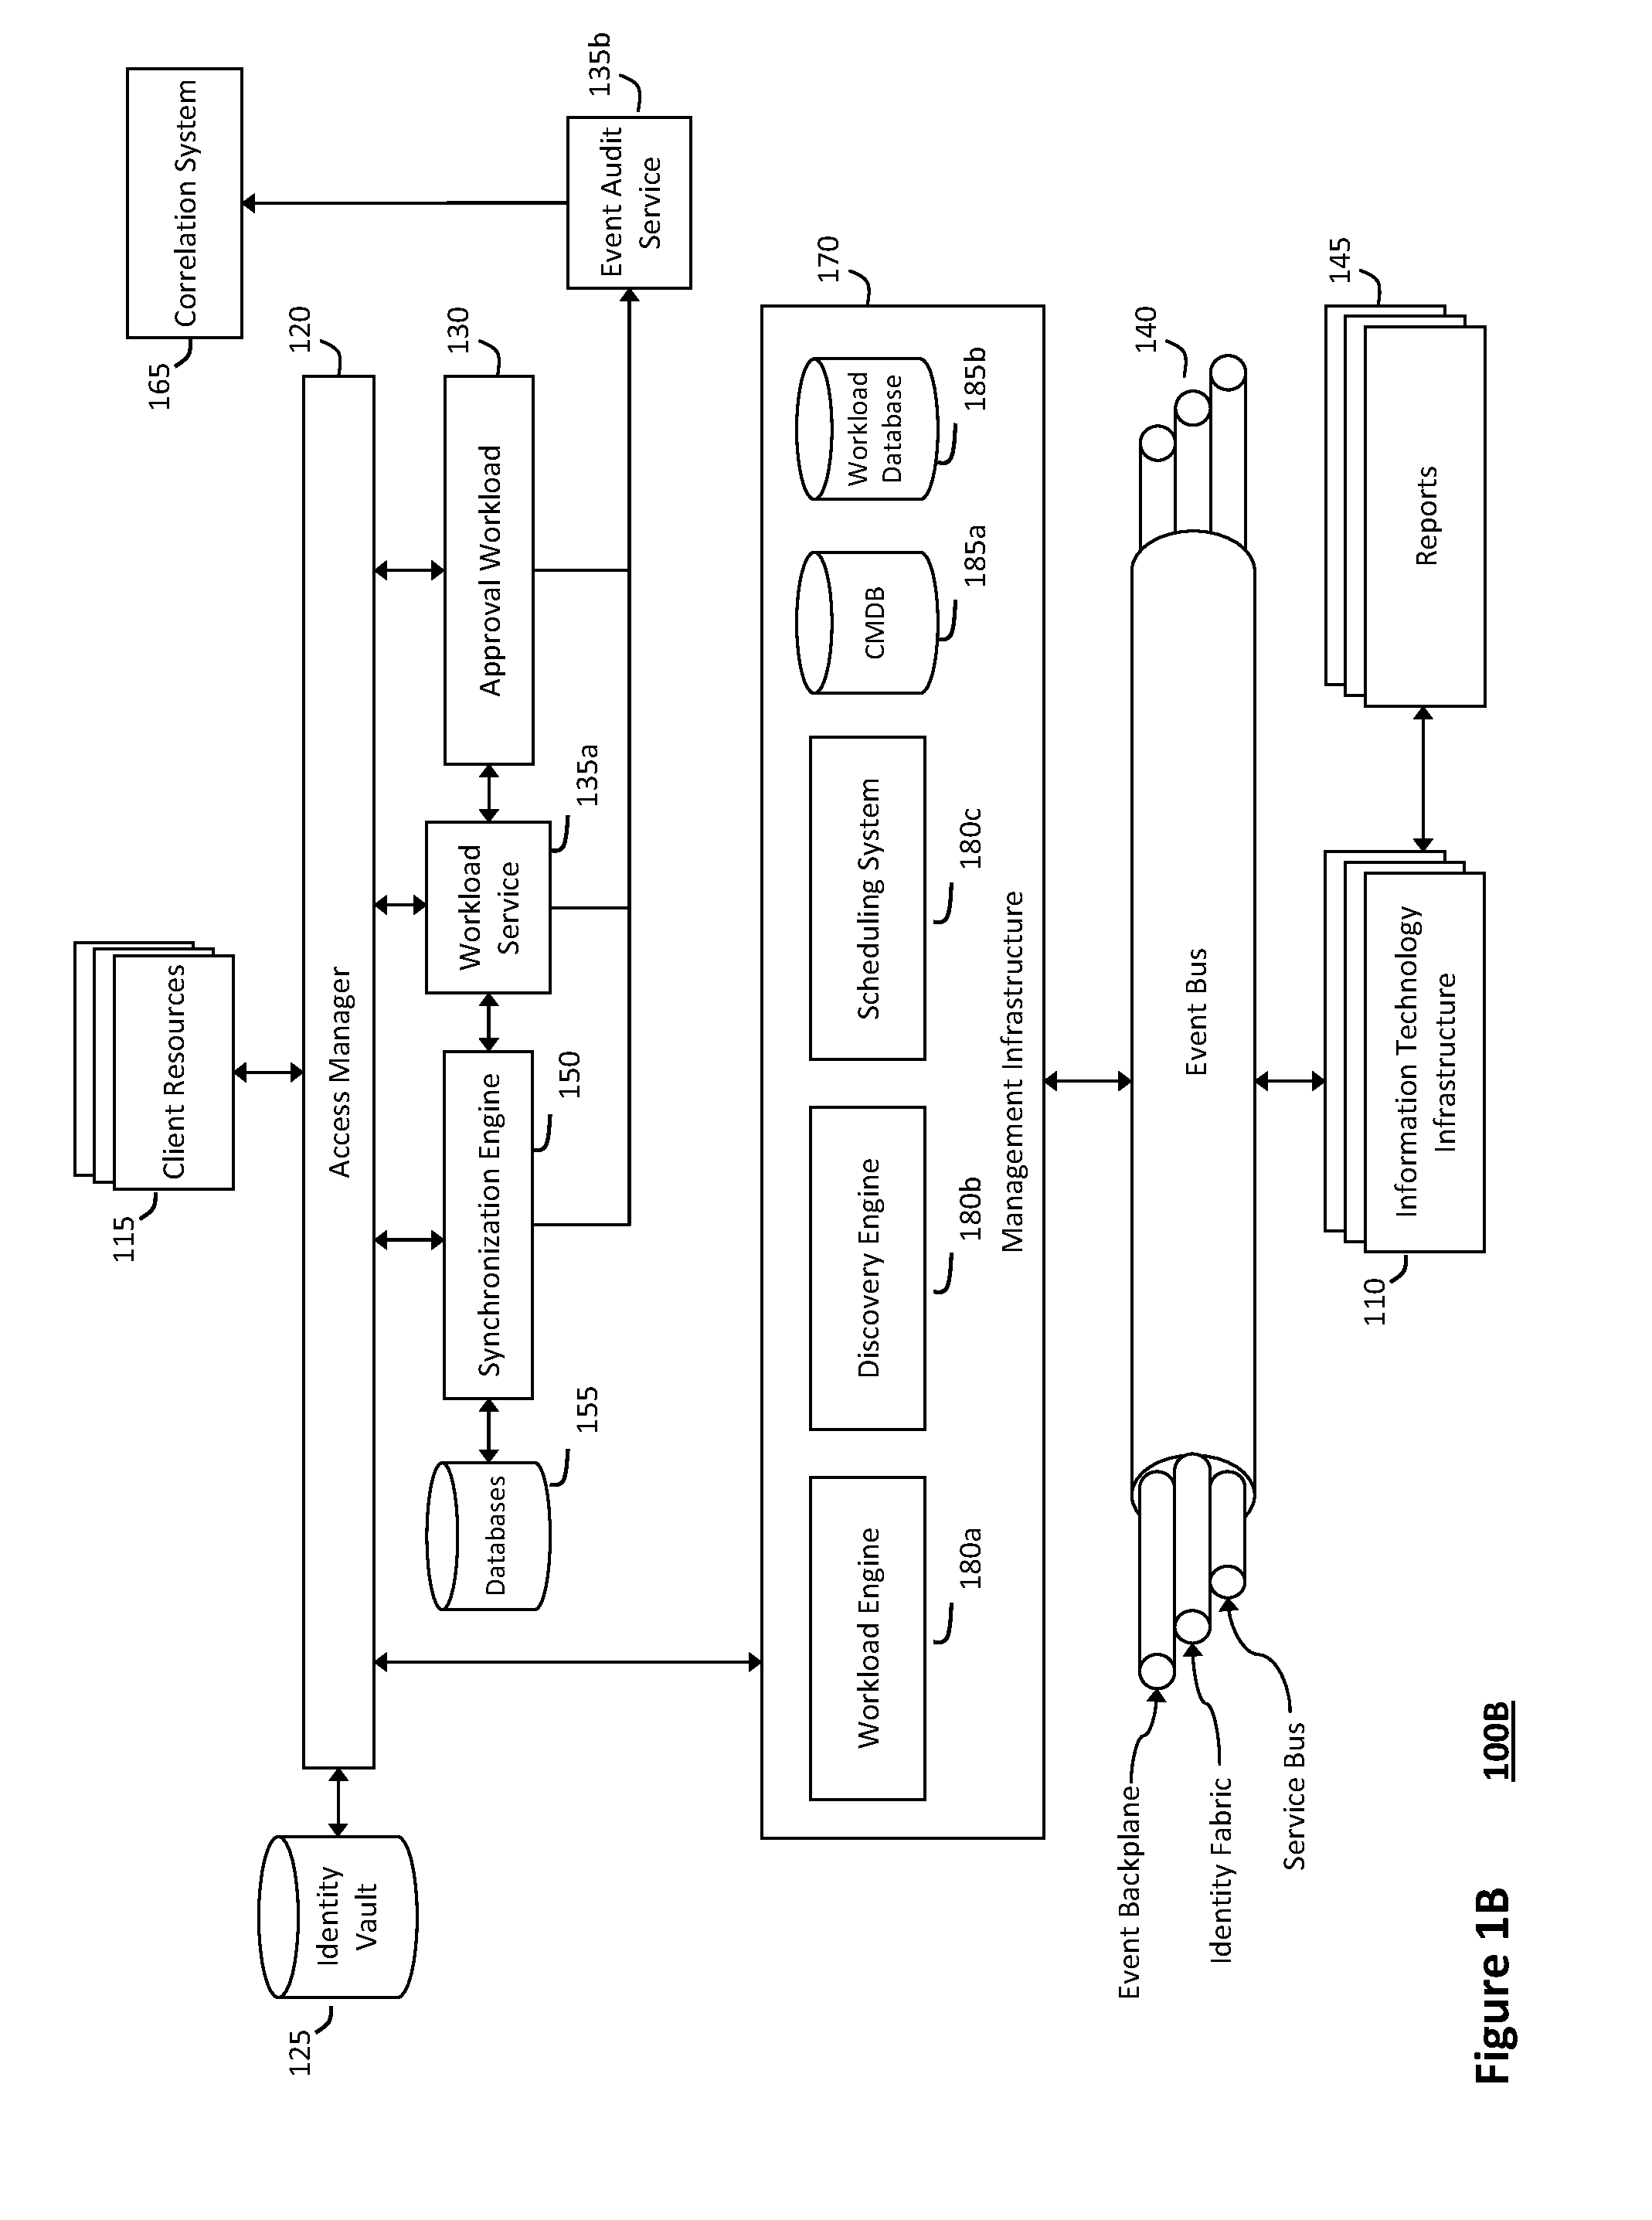 System and method for recording collaborative information technology processes in an intelligent workload management system